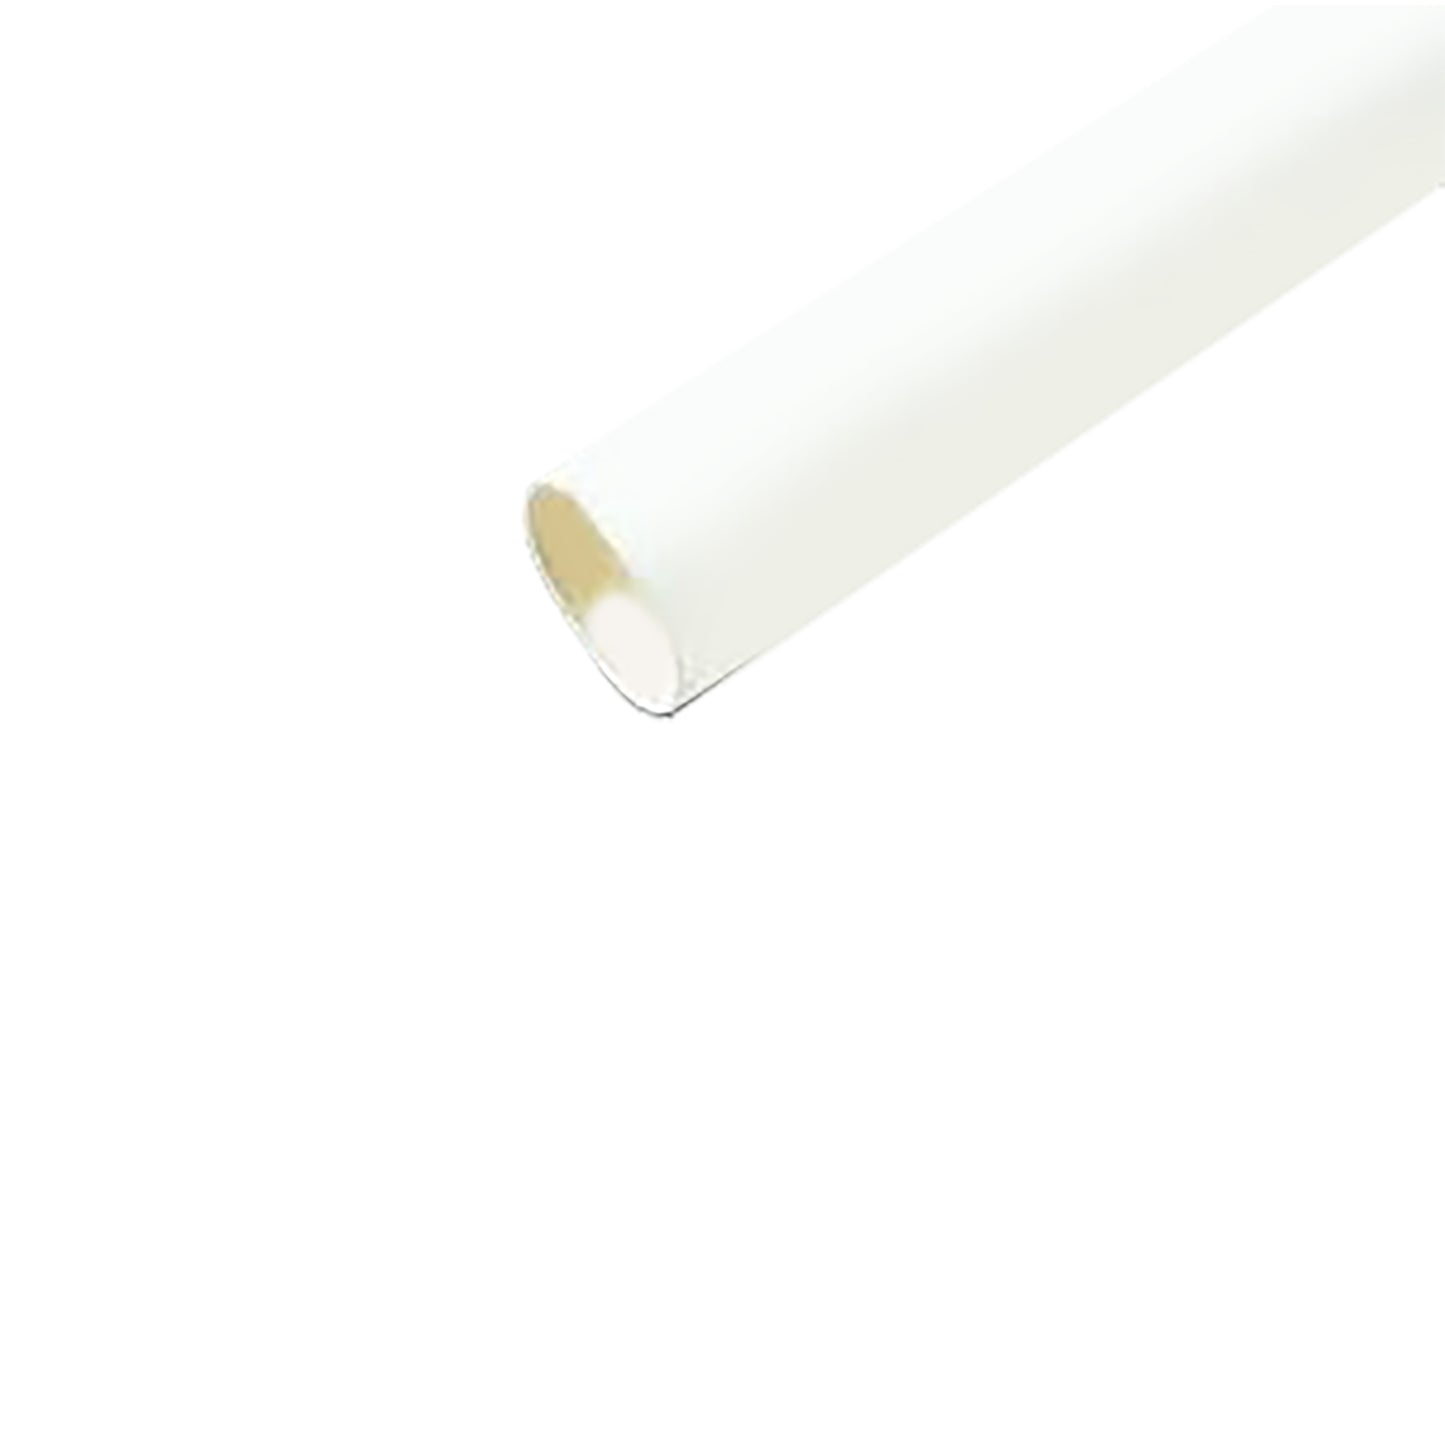 Flexible Thin Single Wall Non-Adhesive Heat Shrink Tubing 2:1 White 3/8" ID - 48" Inch 4 Pack